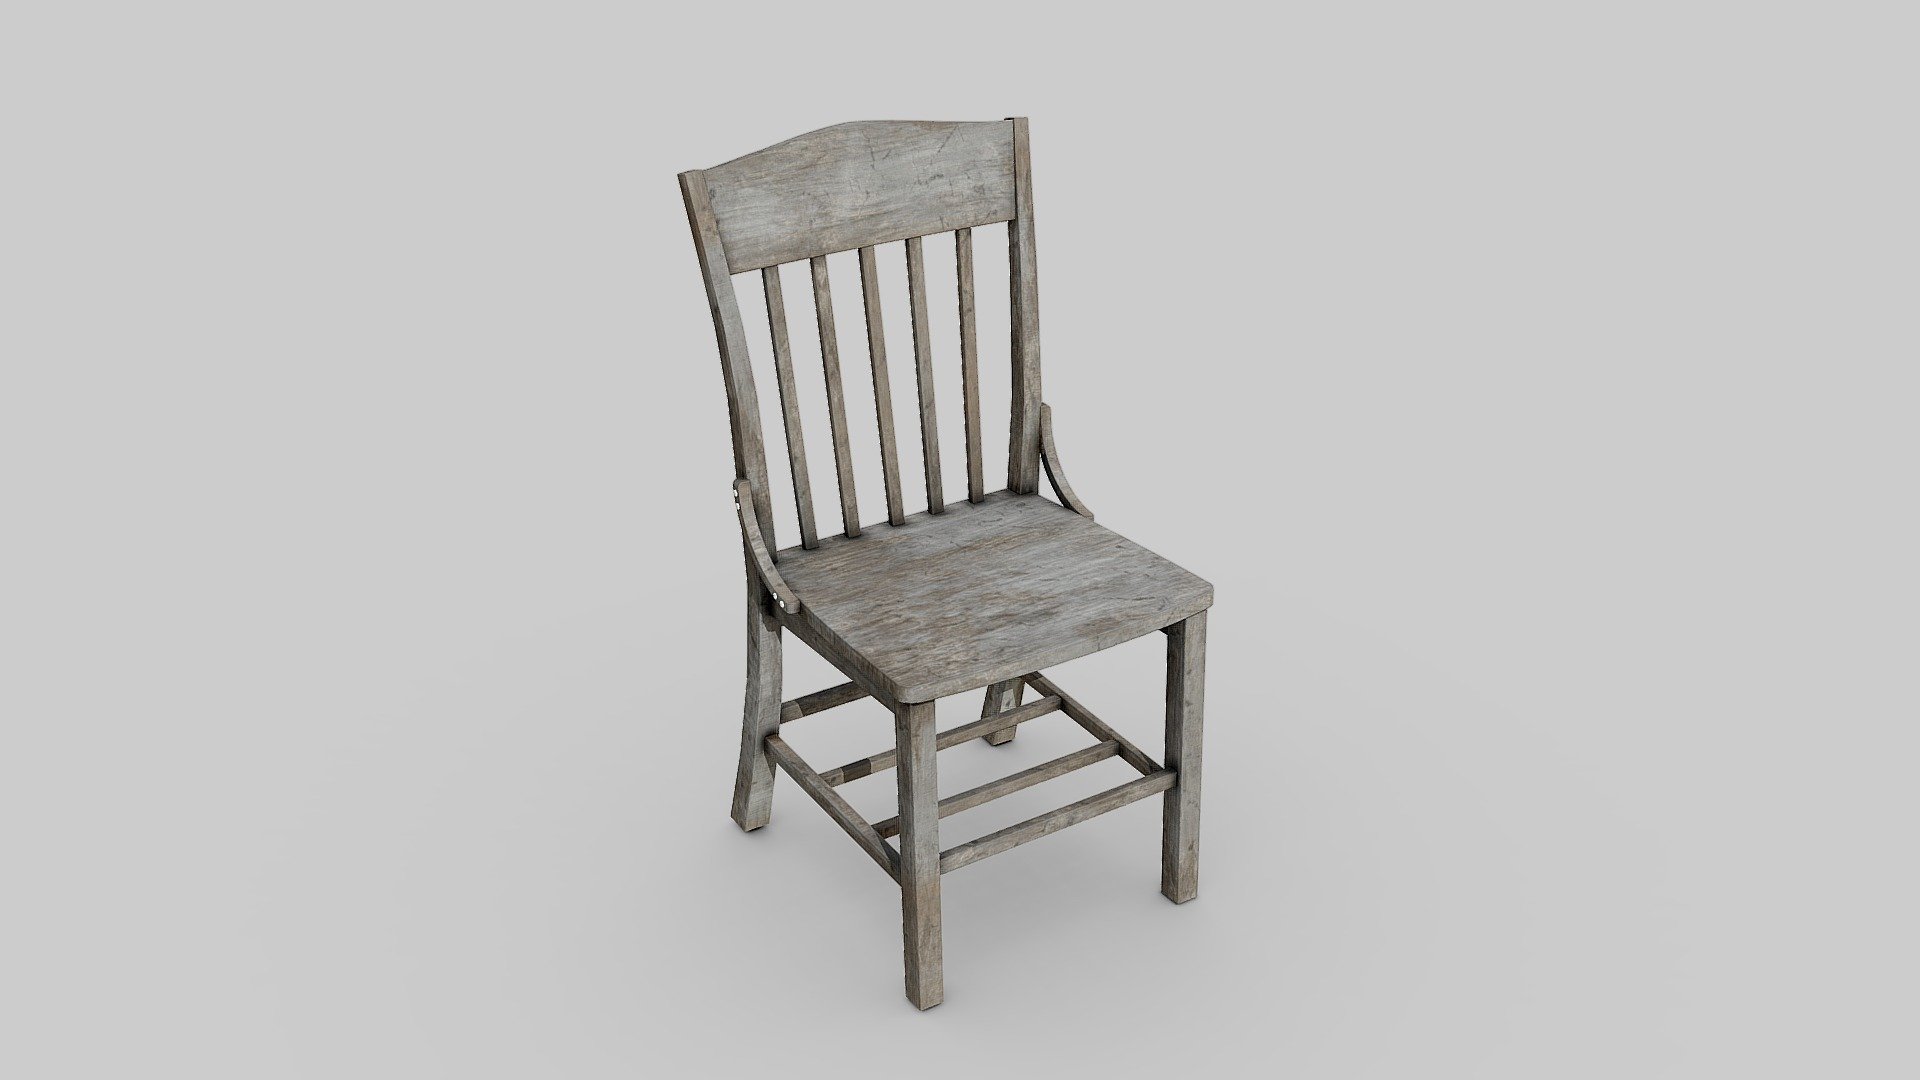 Free download：www.freepoly.org - Chair 03-Freepoly.org - Download Free 3D model by Freepoly.org (@blackrray) 3d model